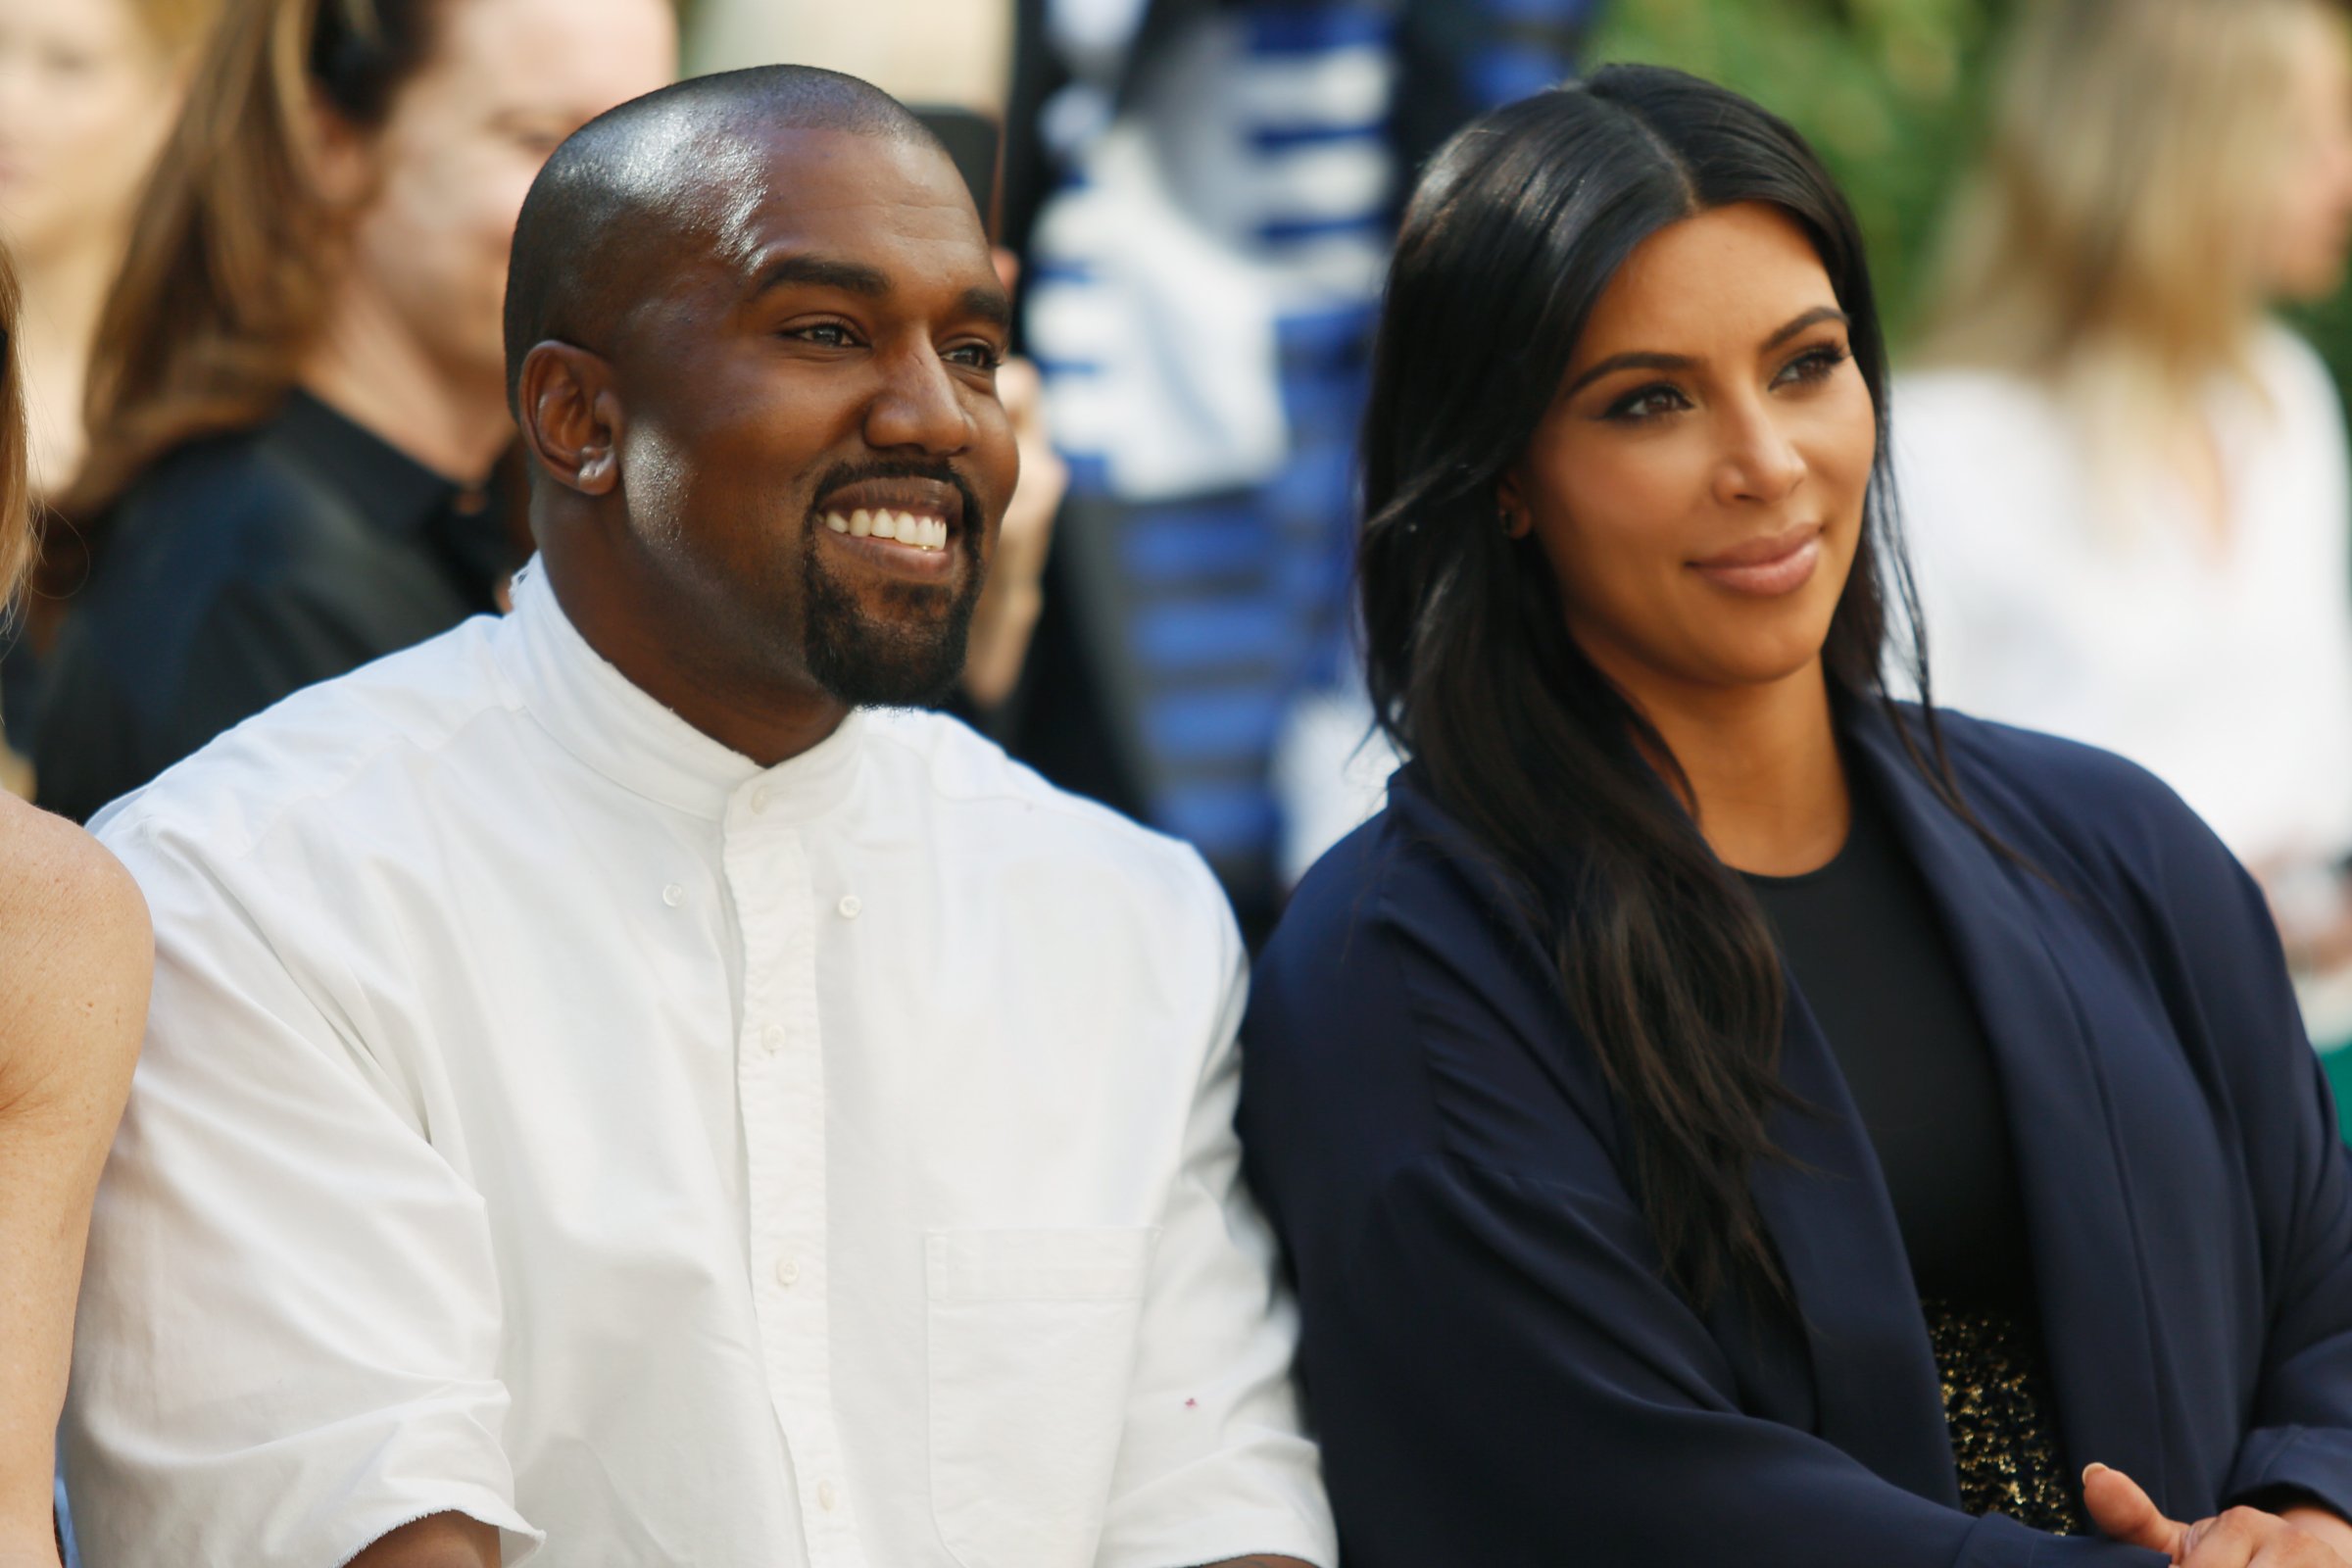 Recording artist Kanye West (L) and TV personality Kim Kardashian attend CFDA/Vogue Fashion Fund Show and Tea at Chateau Marmont on October 20, 2015 in Los Angeles, California.